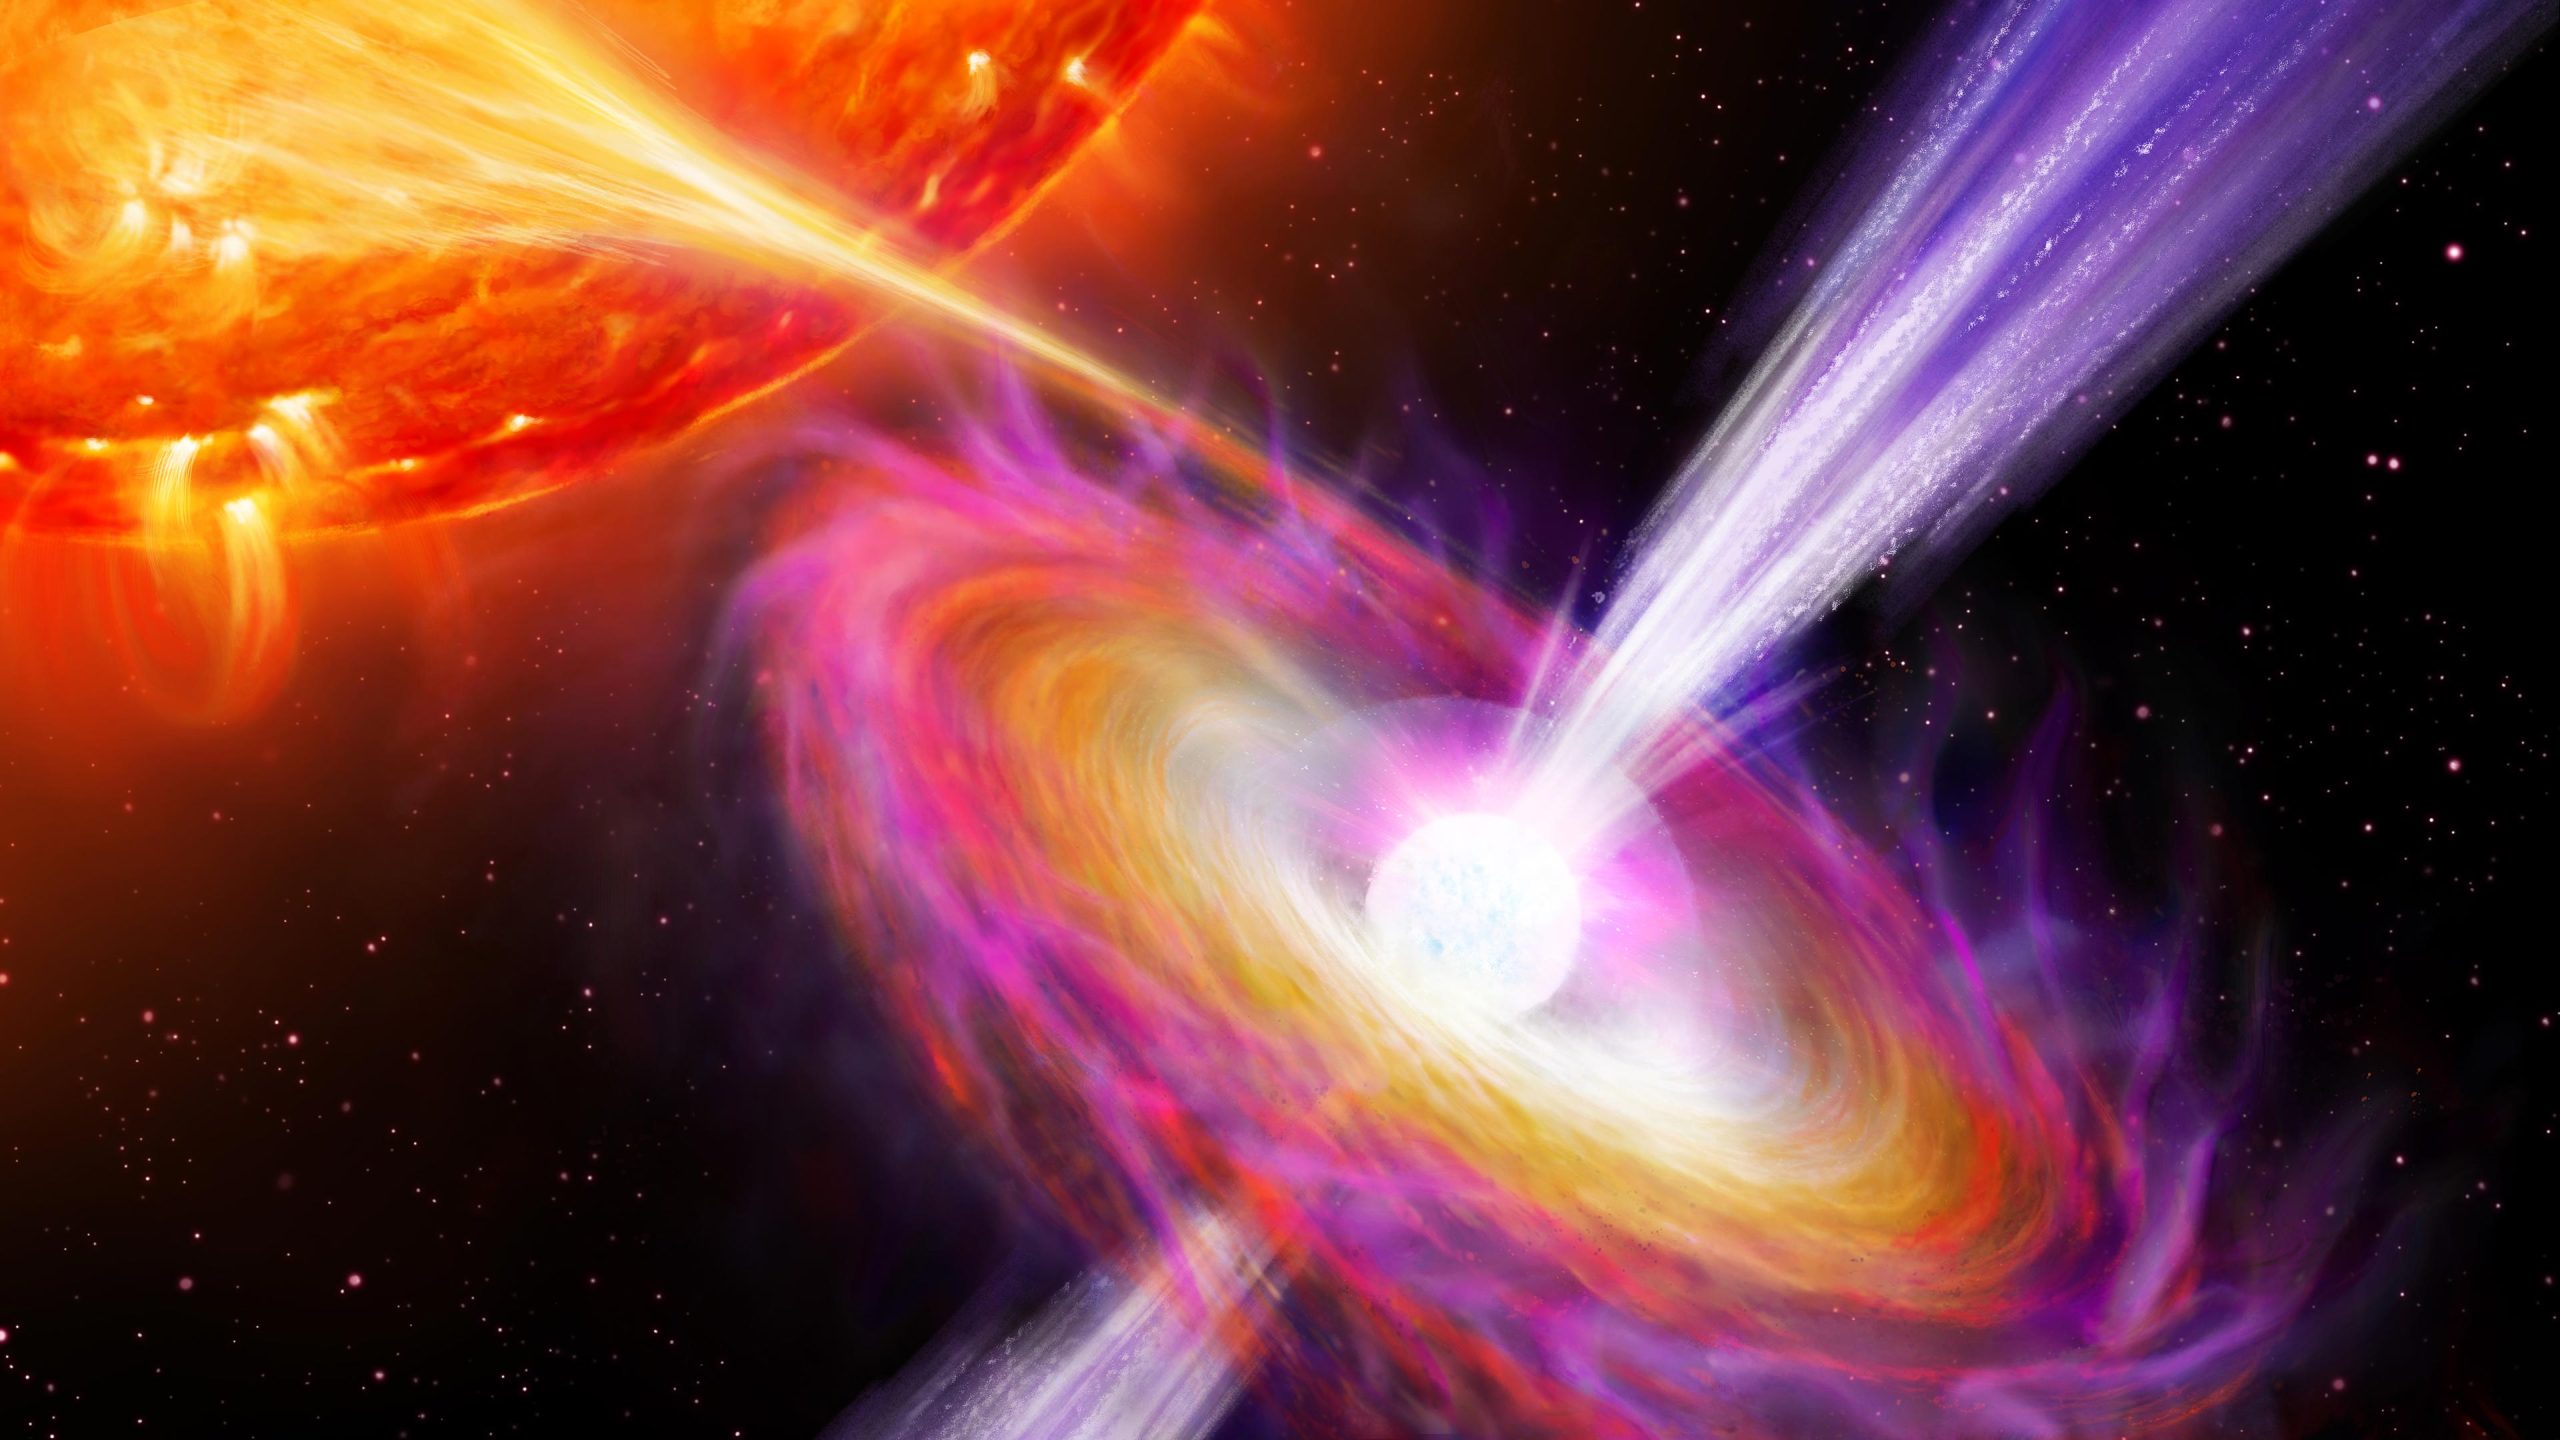 New Discovery Reveals Stellar Jets’ Incredible Speeds for the First Time “Cosmic Cannibals”